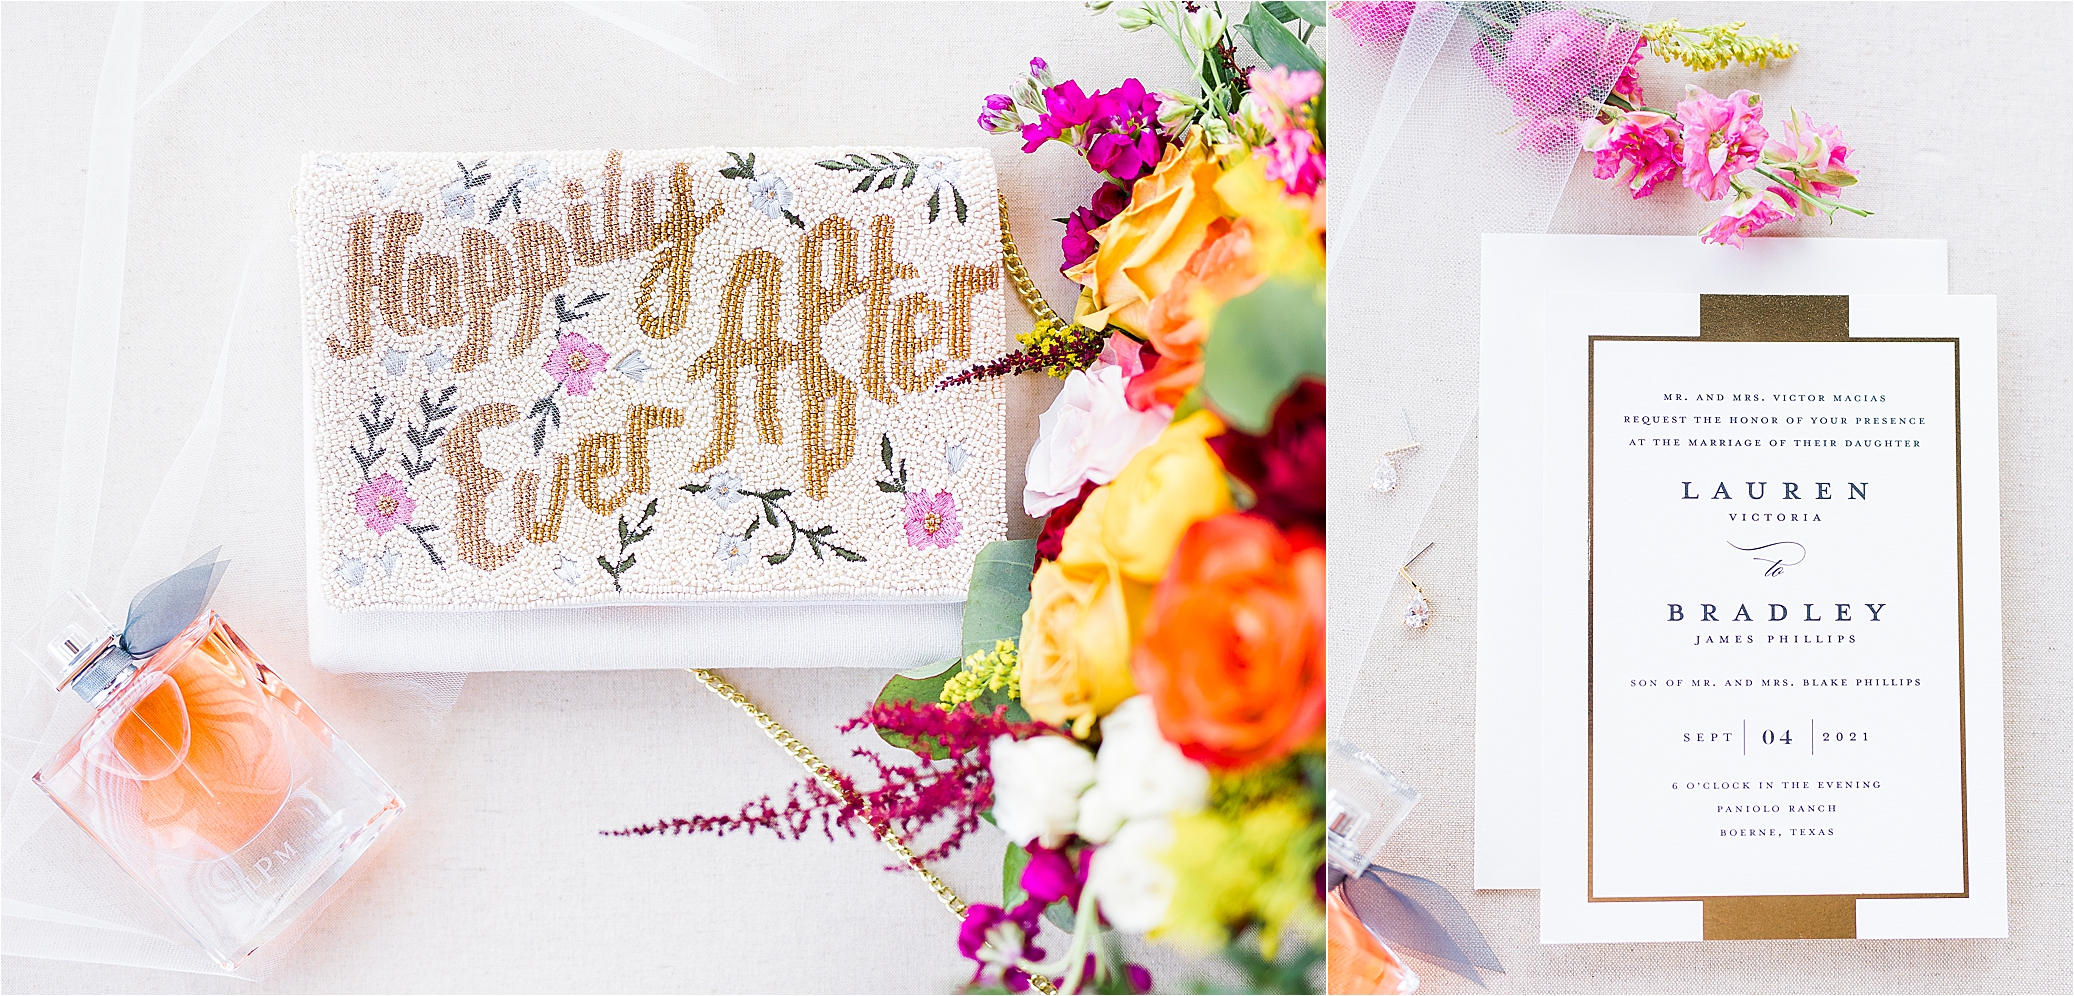 A wedding invitation, perfume and happily ever after purse for bridal details on wedding day at Paniolo Ranch in Boerne, Texas